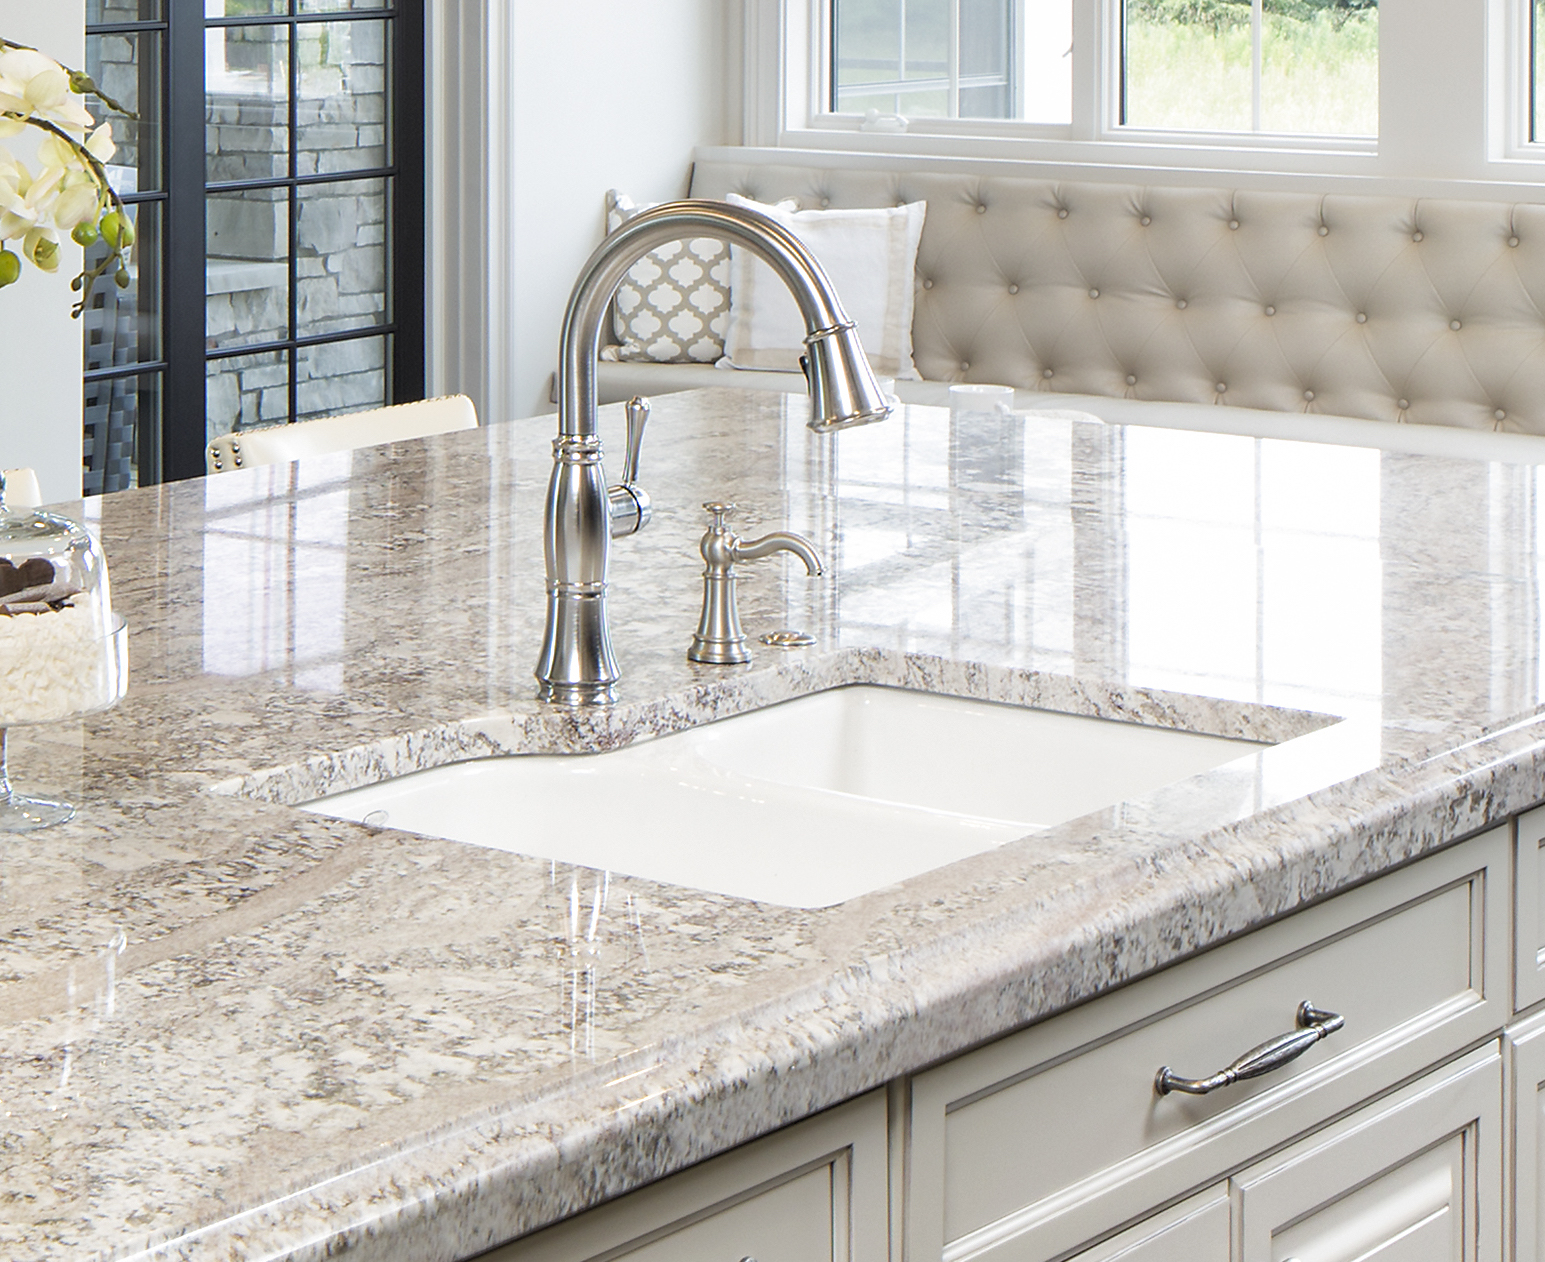 Which sink is suitable for a granite countertop kitchen sink set in granite countertop by cu0026d granite minneapolis mn XNPIHXC